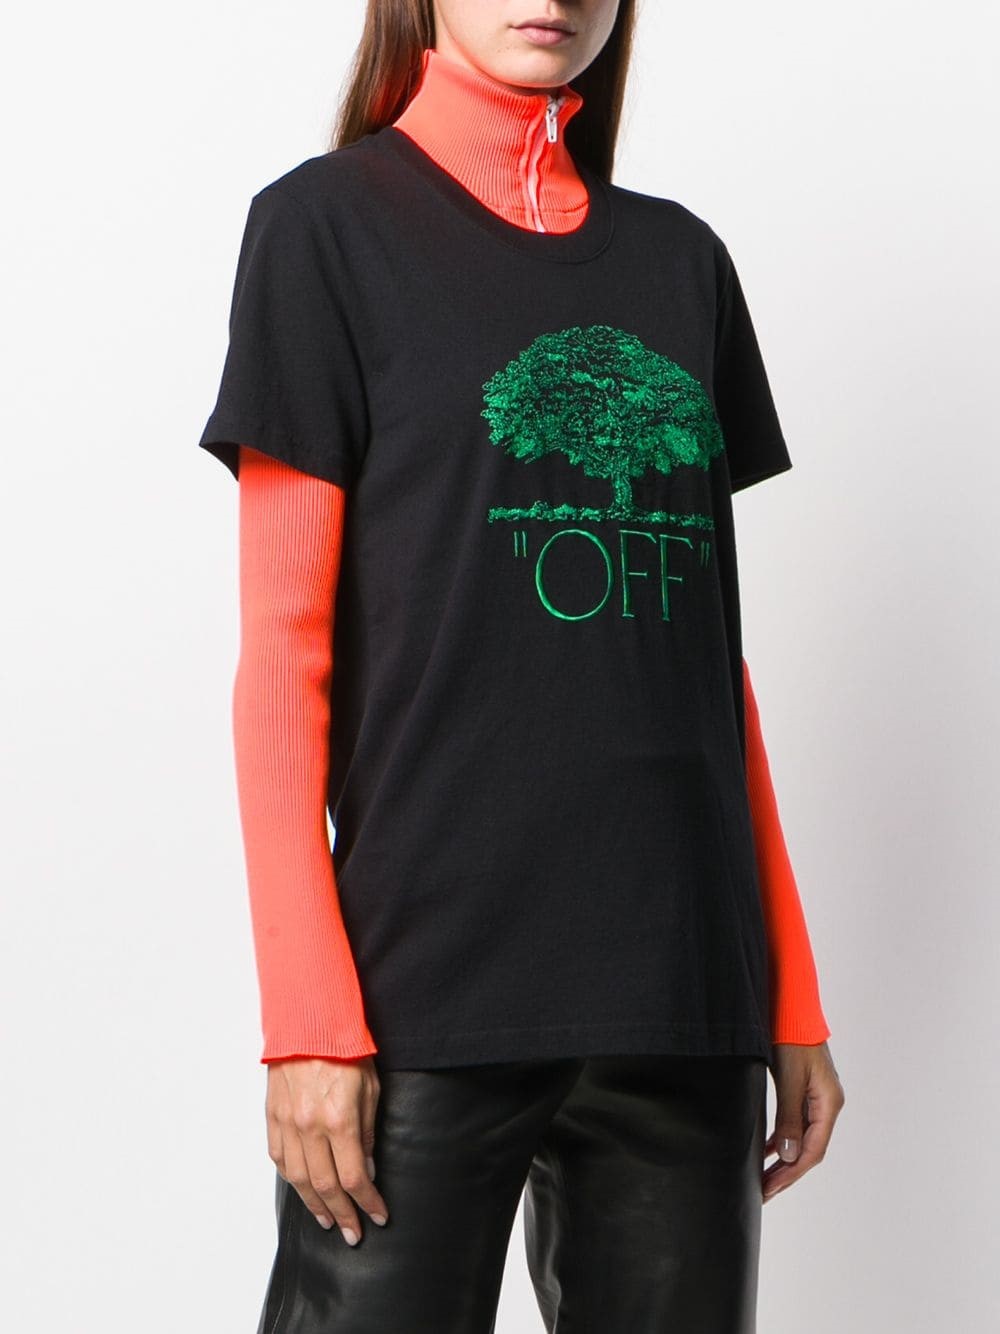 off-white OFF TREE T-SHIRT available on montiboutique.com - 31129